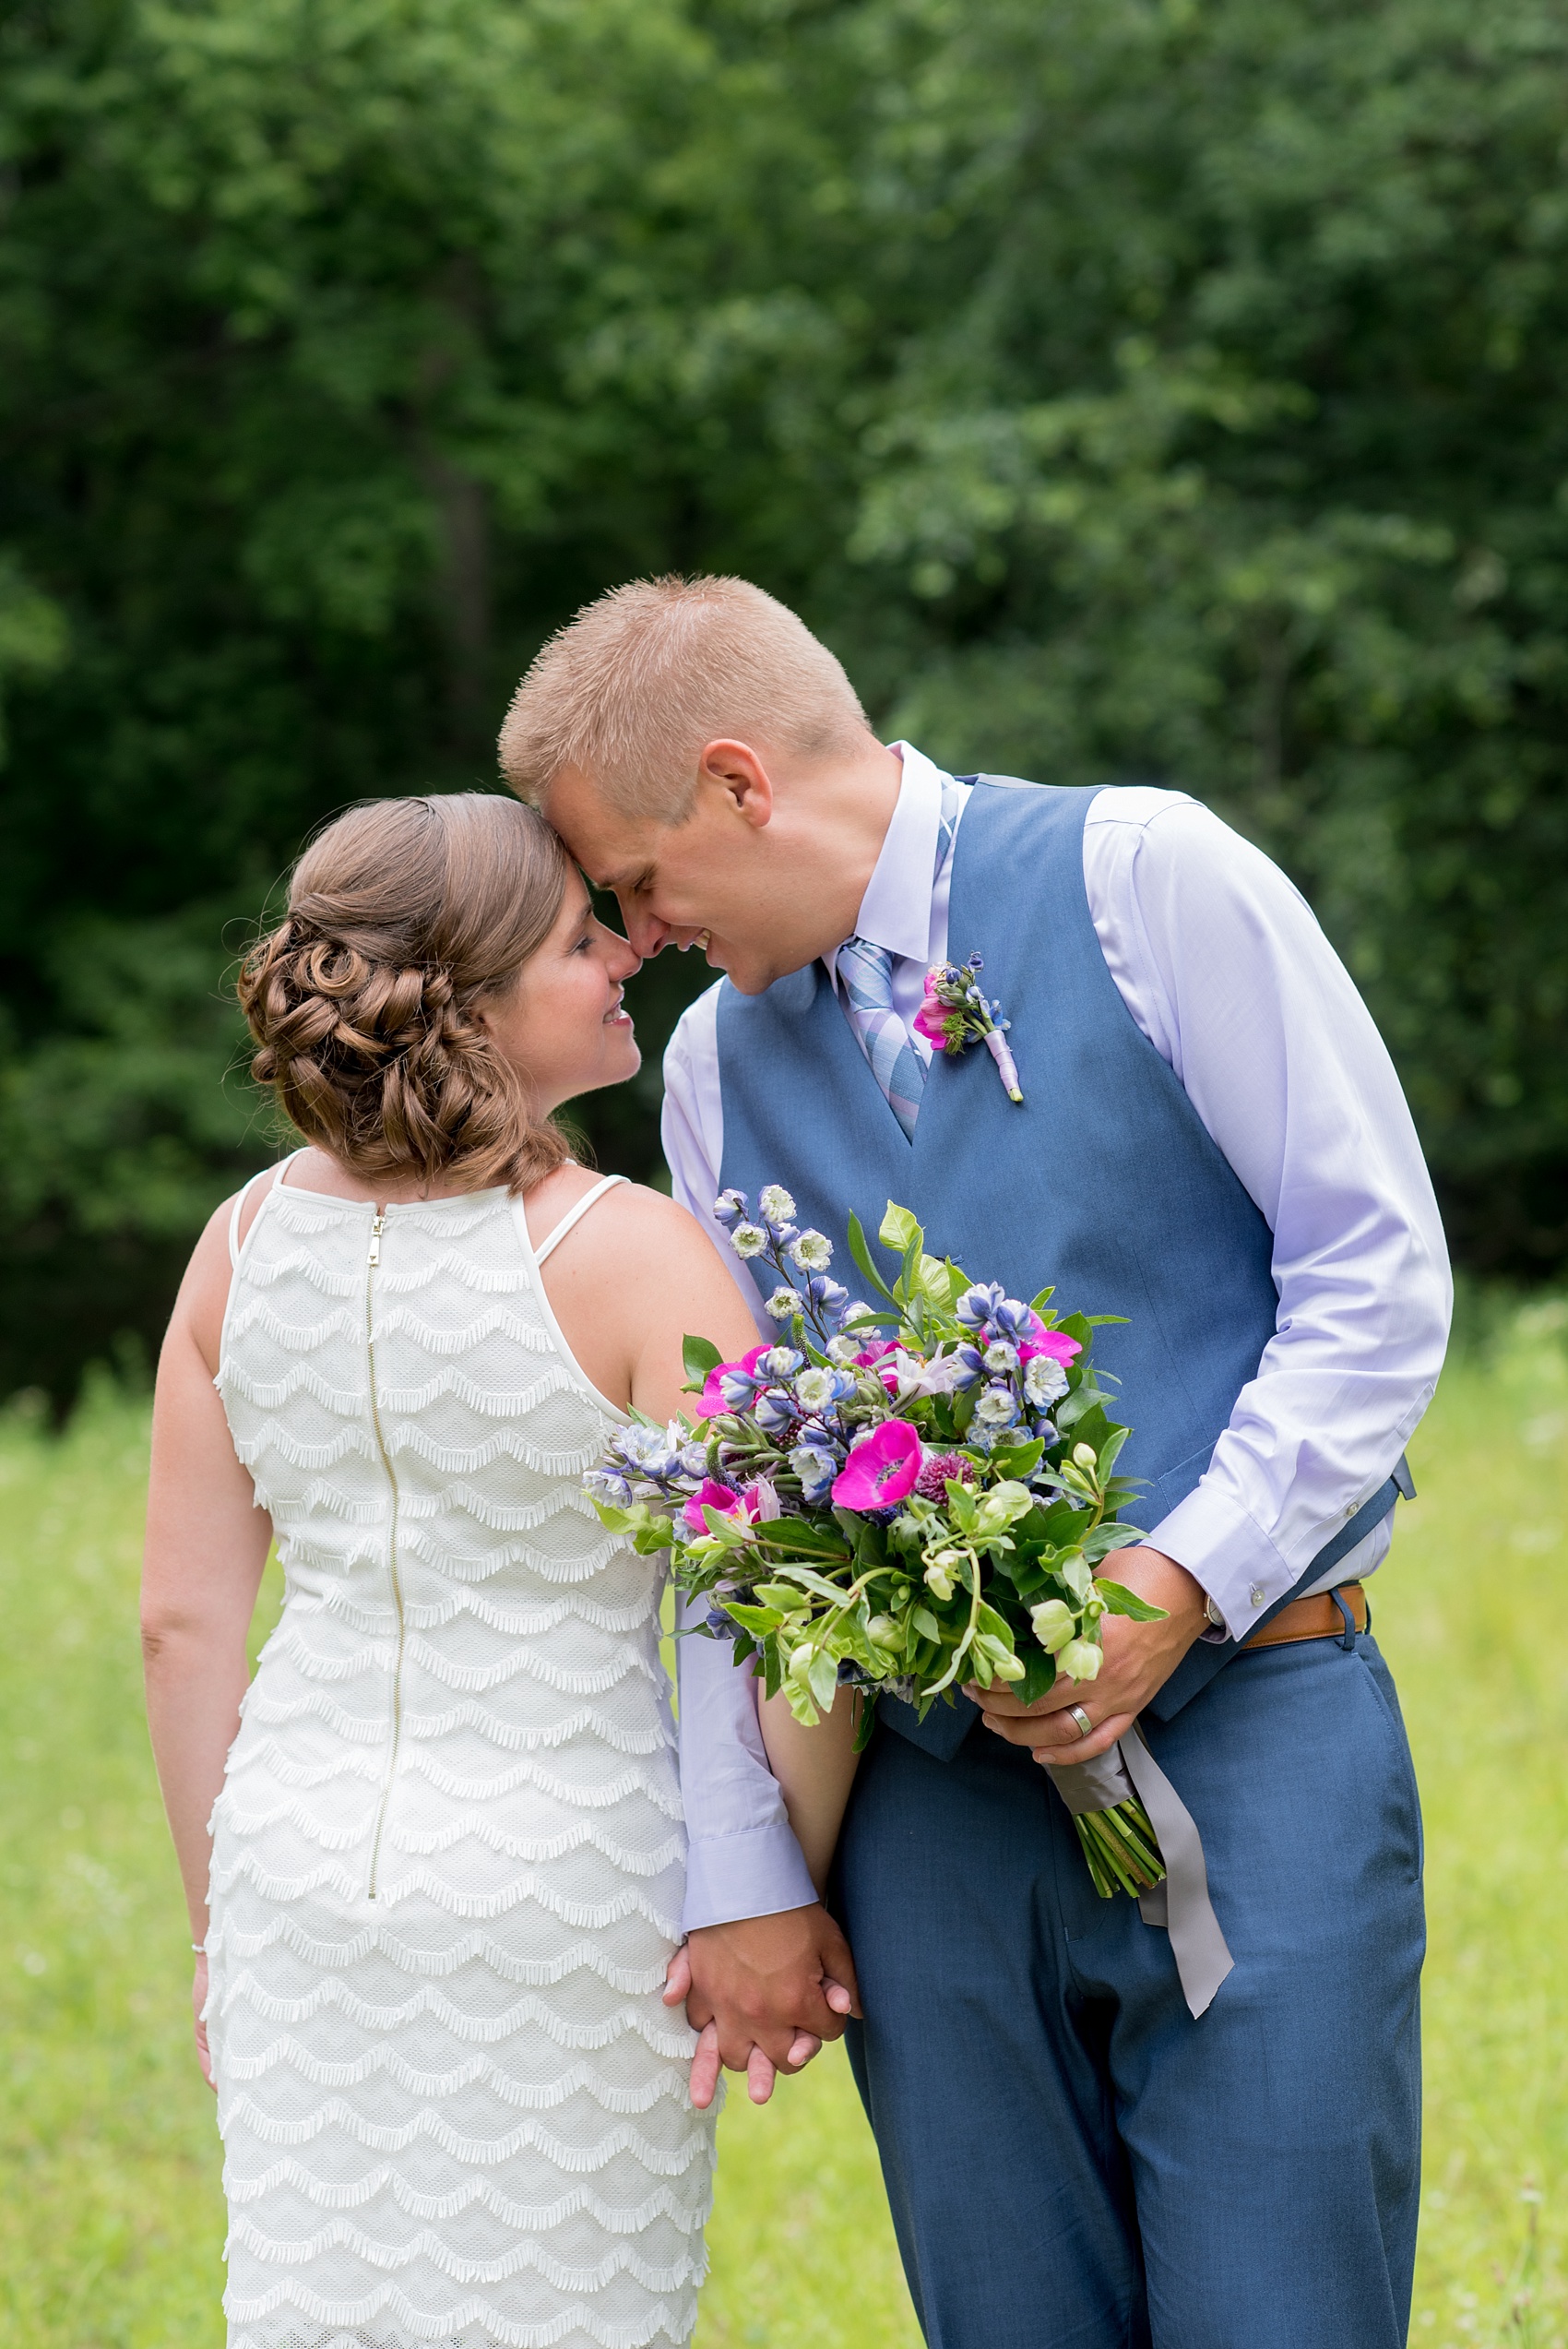 Mikkel Paige Photography photo of an anniversary session with light blue, navy and fuchsia pink accents with a bride and groom in a short white dress and blue suit and vest. 